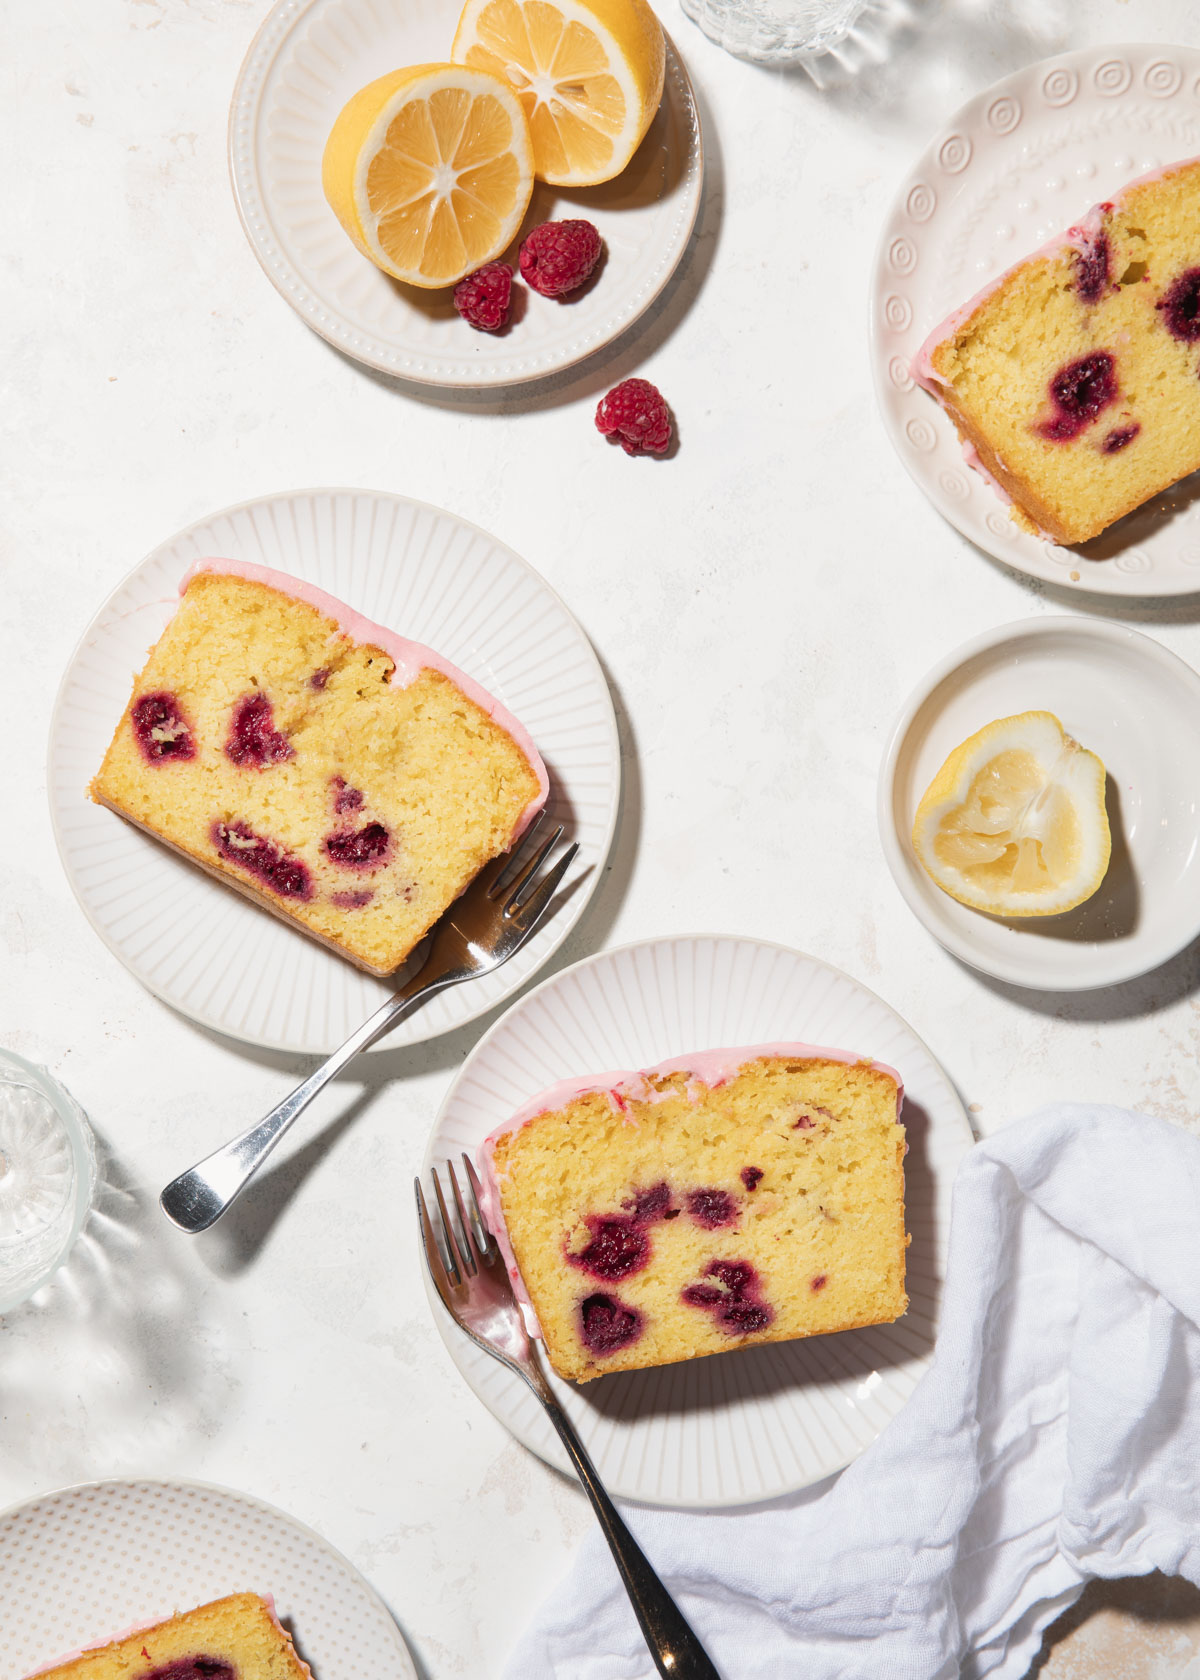 A high-contrast overhead shot of slices of snack cake studded with raspberries.